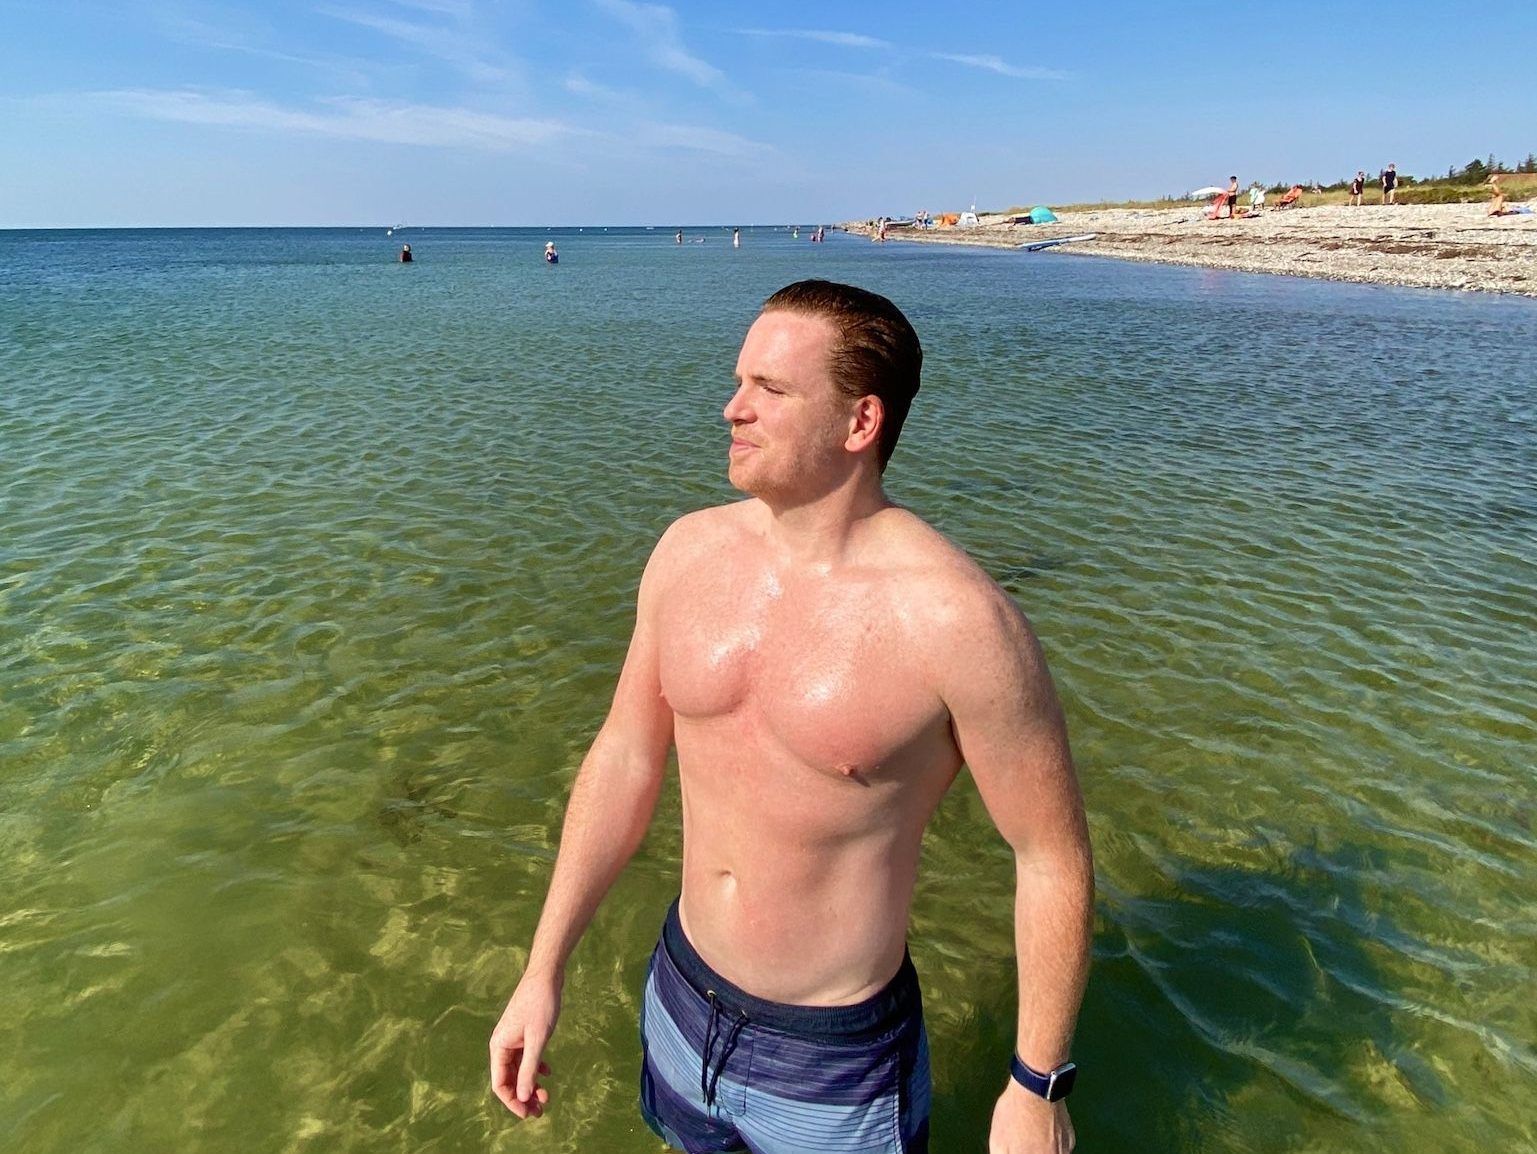 Of course, a short break in Fehmarn also includes a refreshing swim in the crystal clear sea water of the Baltic Sea. Photo: Michael B.